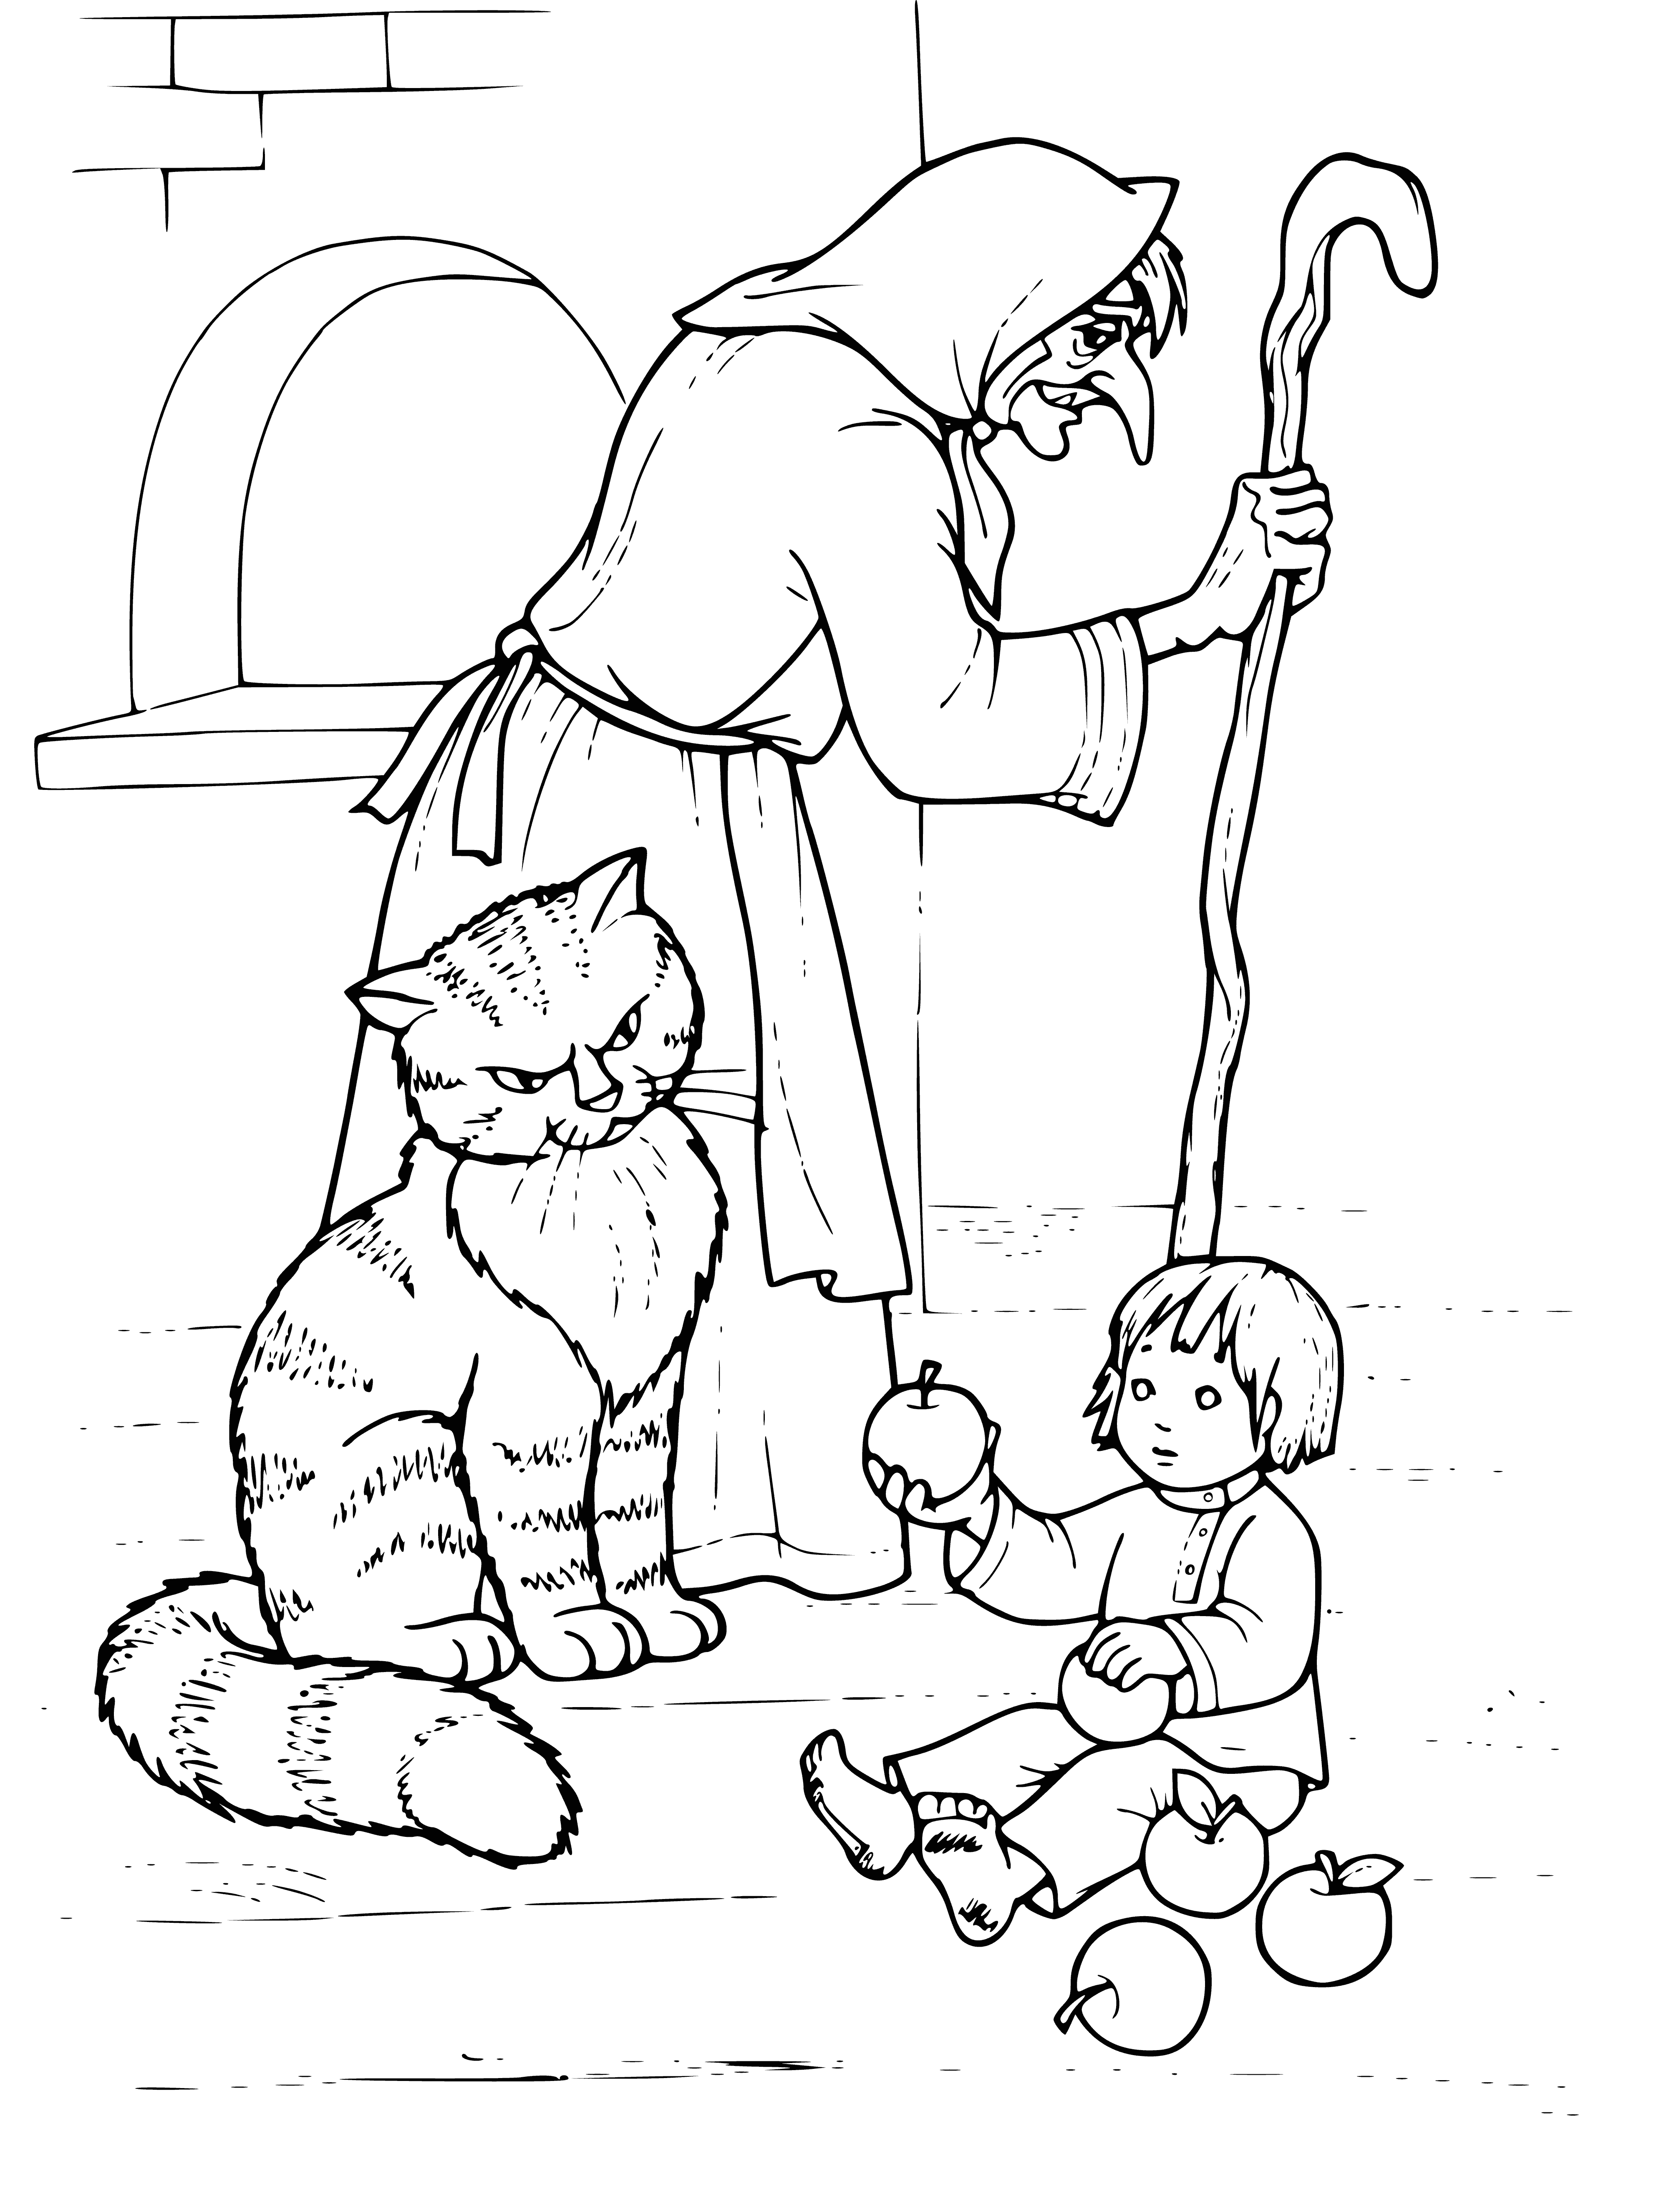 In the hut of Baba Yaga coloring page